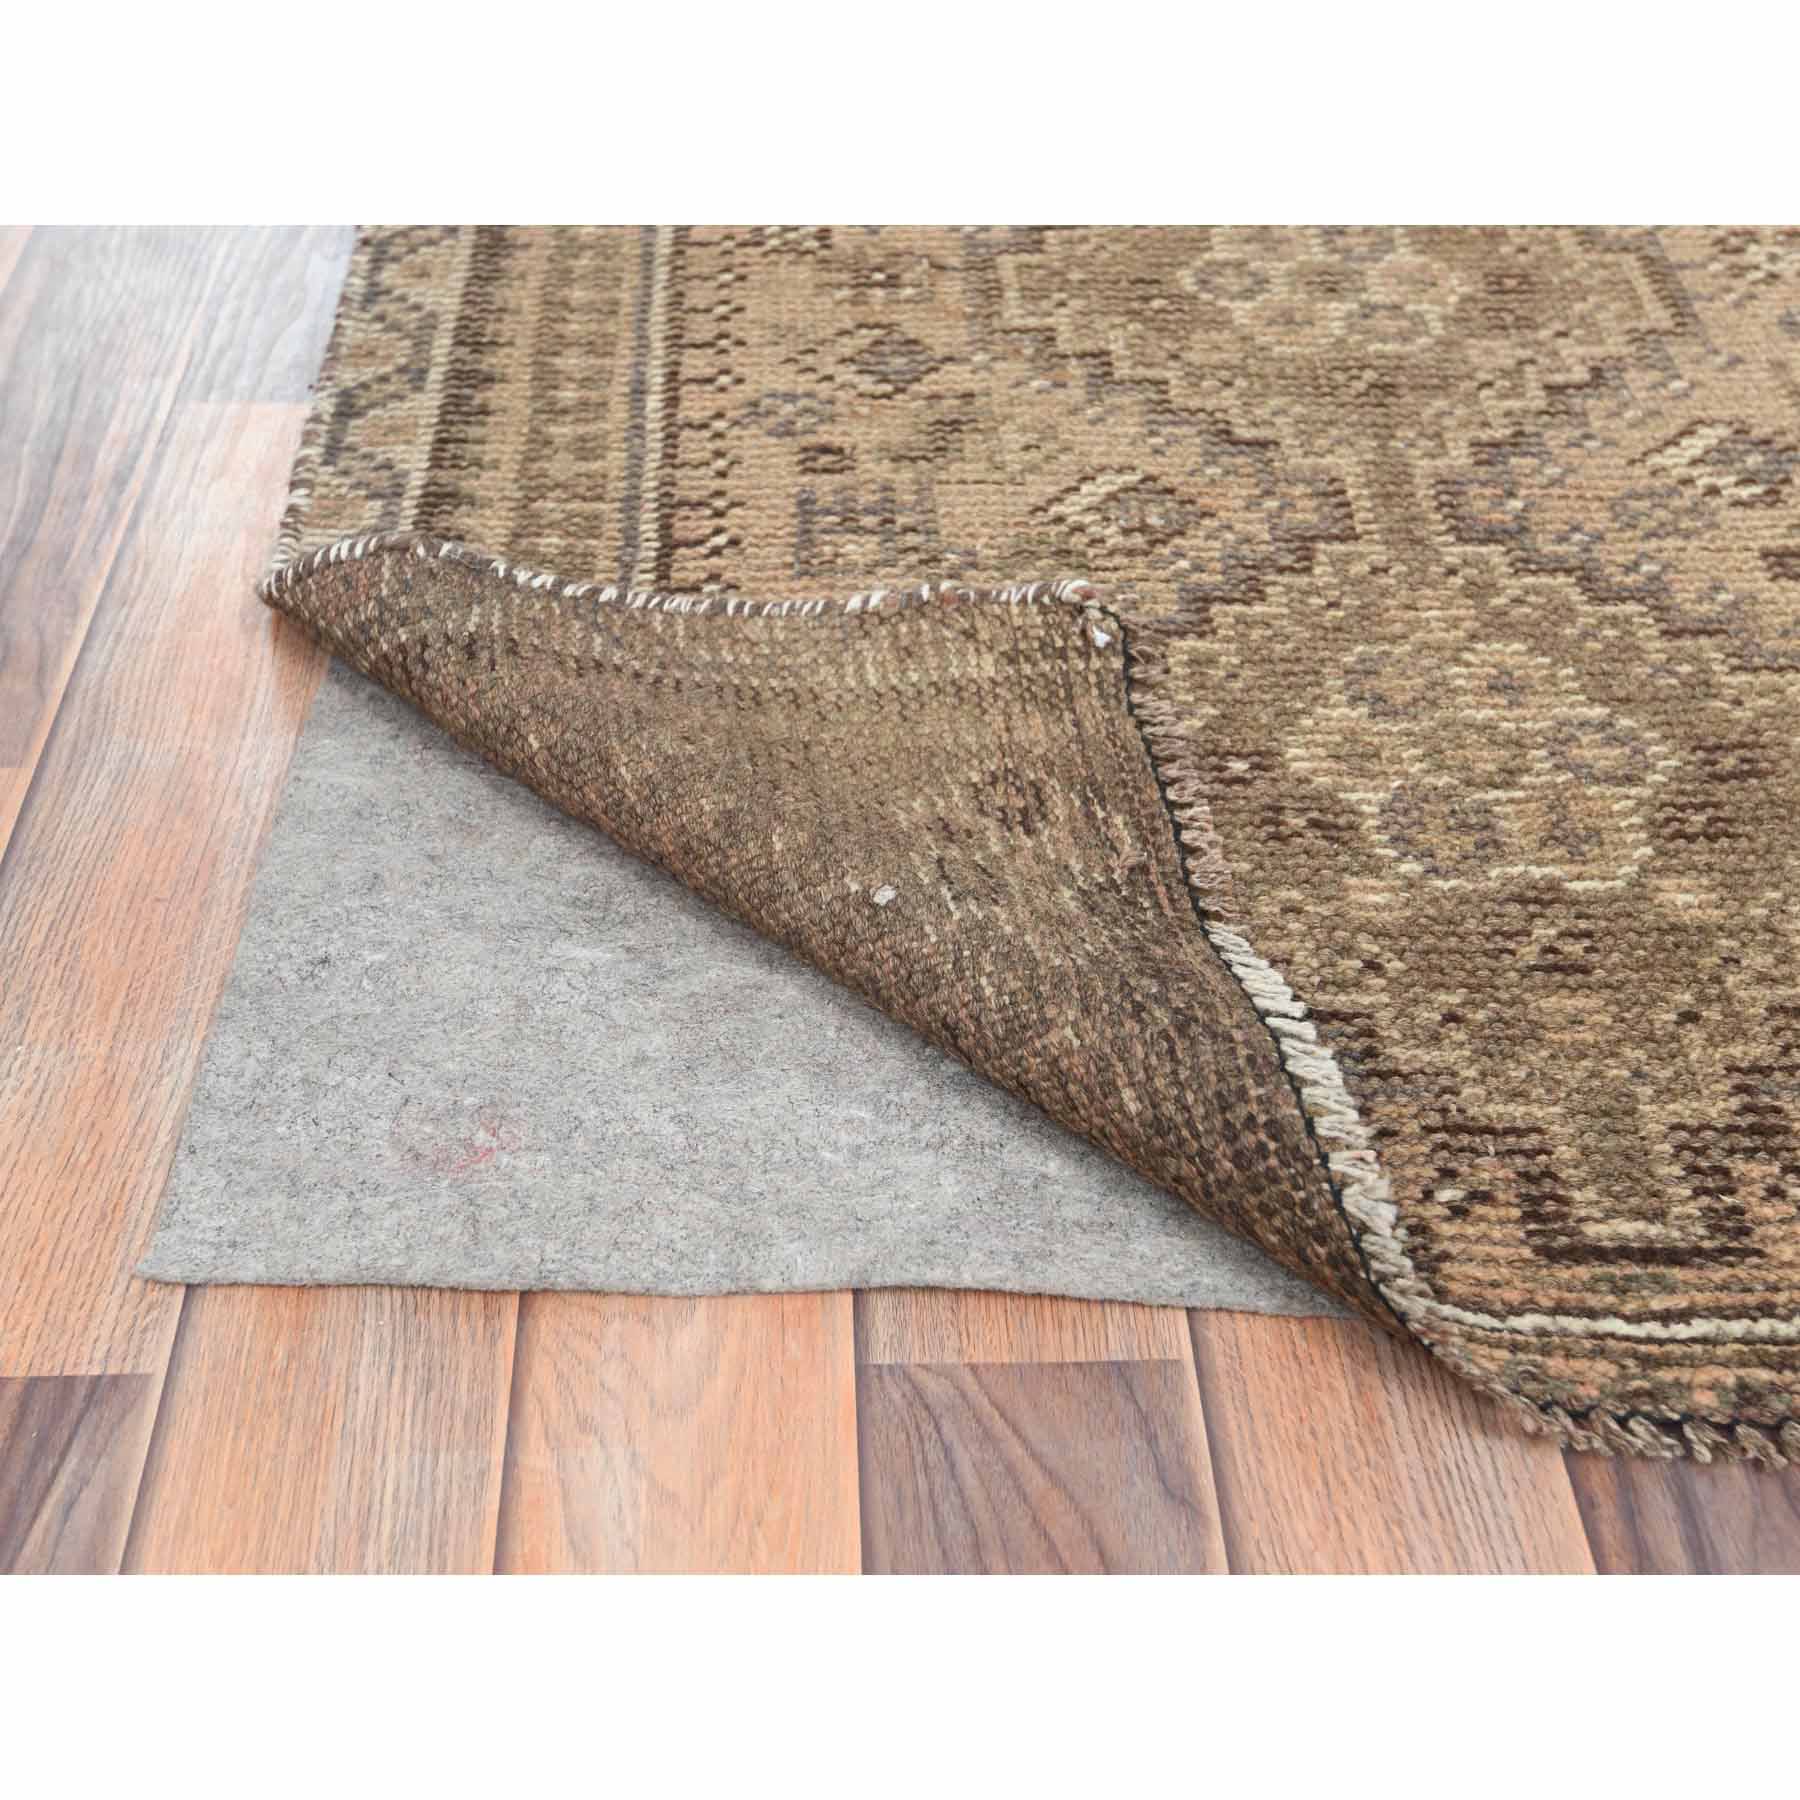 Overdyed-Vintage-Hand-Knotted-Rug-414025